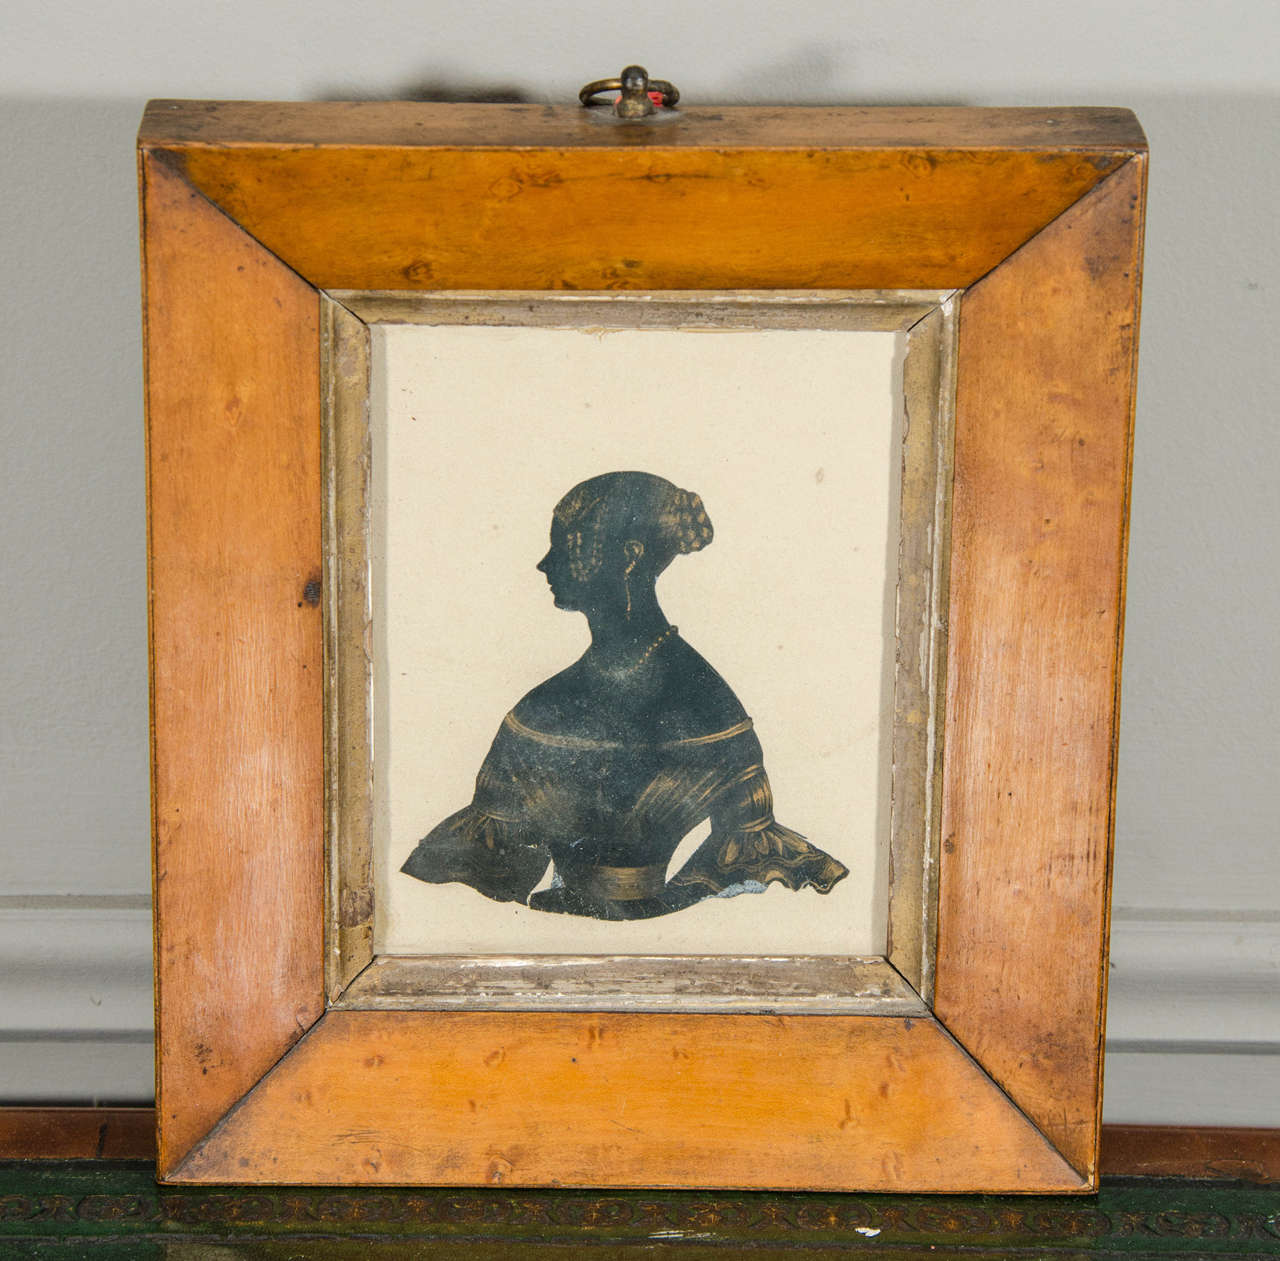 This framed mid-19th century Scherenschnitte style Silhouette portrait is enhanced by hand-sketched details illustrating a victorian braided hairstyle, jewelry and off-shoulder dress. A charismatic piece of Folk Art in the original wooden frame.